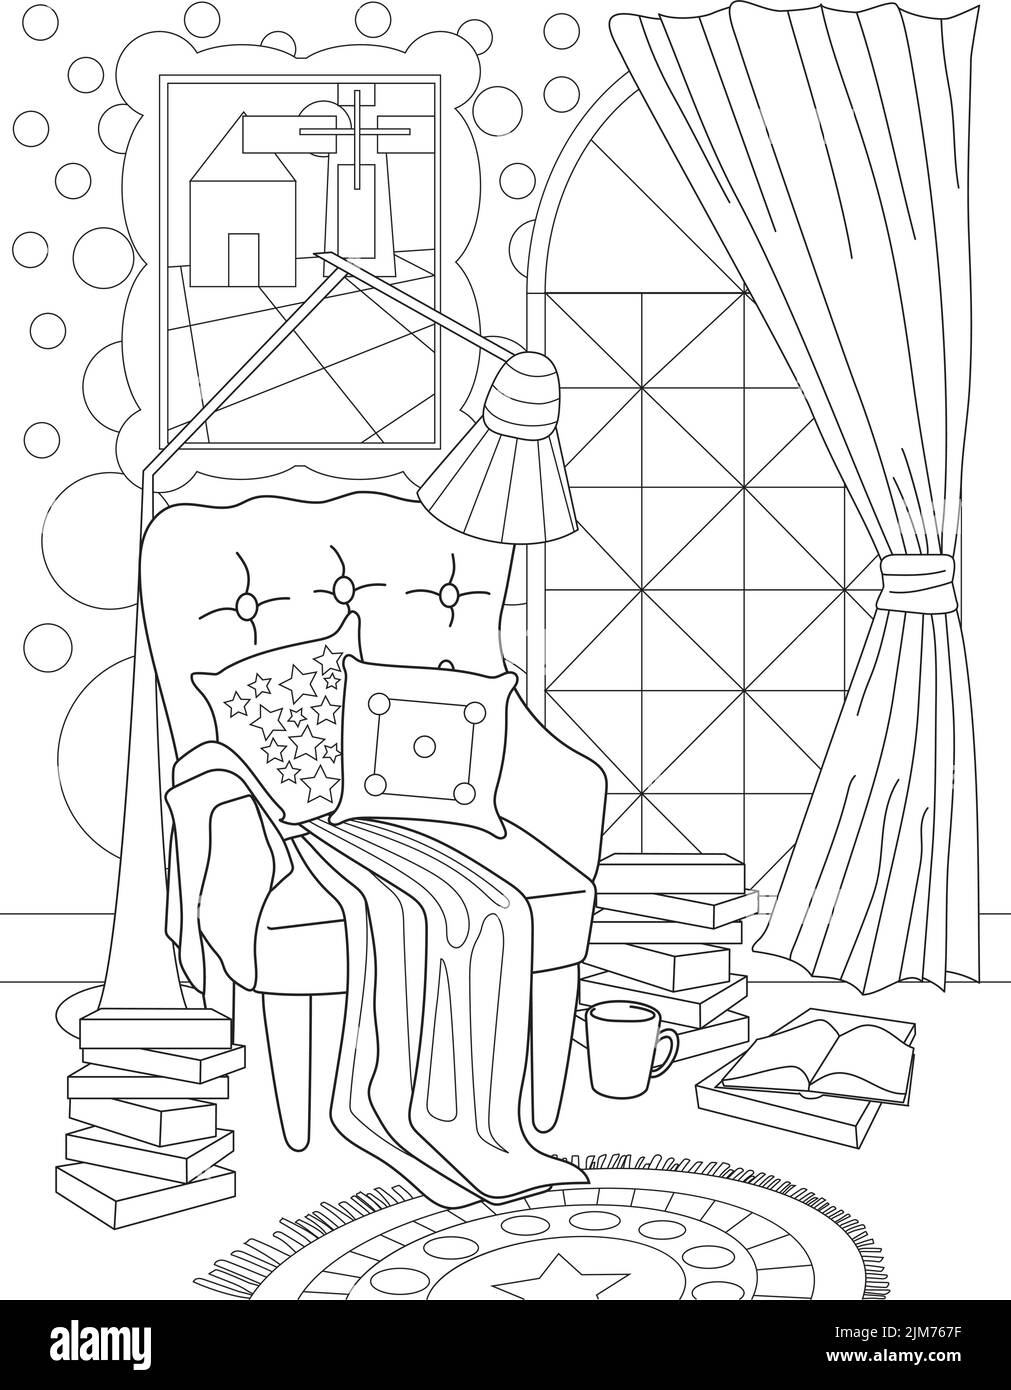 Coloring Page With Cozy Armchair With Pillows And Blanket On It. Sheet To Be Colored With Chair And Lamp Over, Books And Cup On Ground, Big Window And Stock Vector